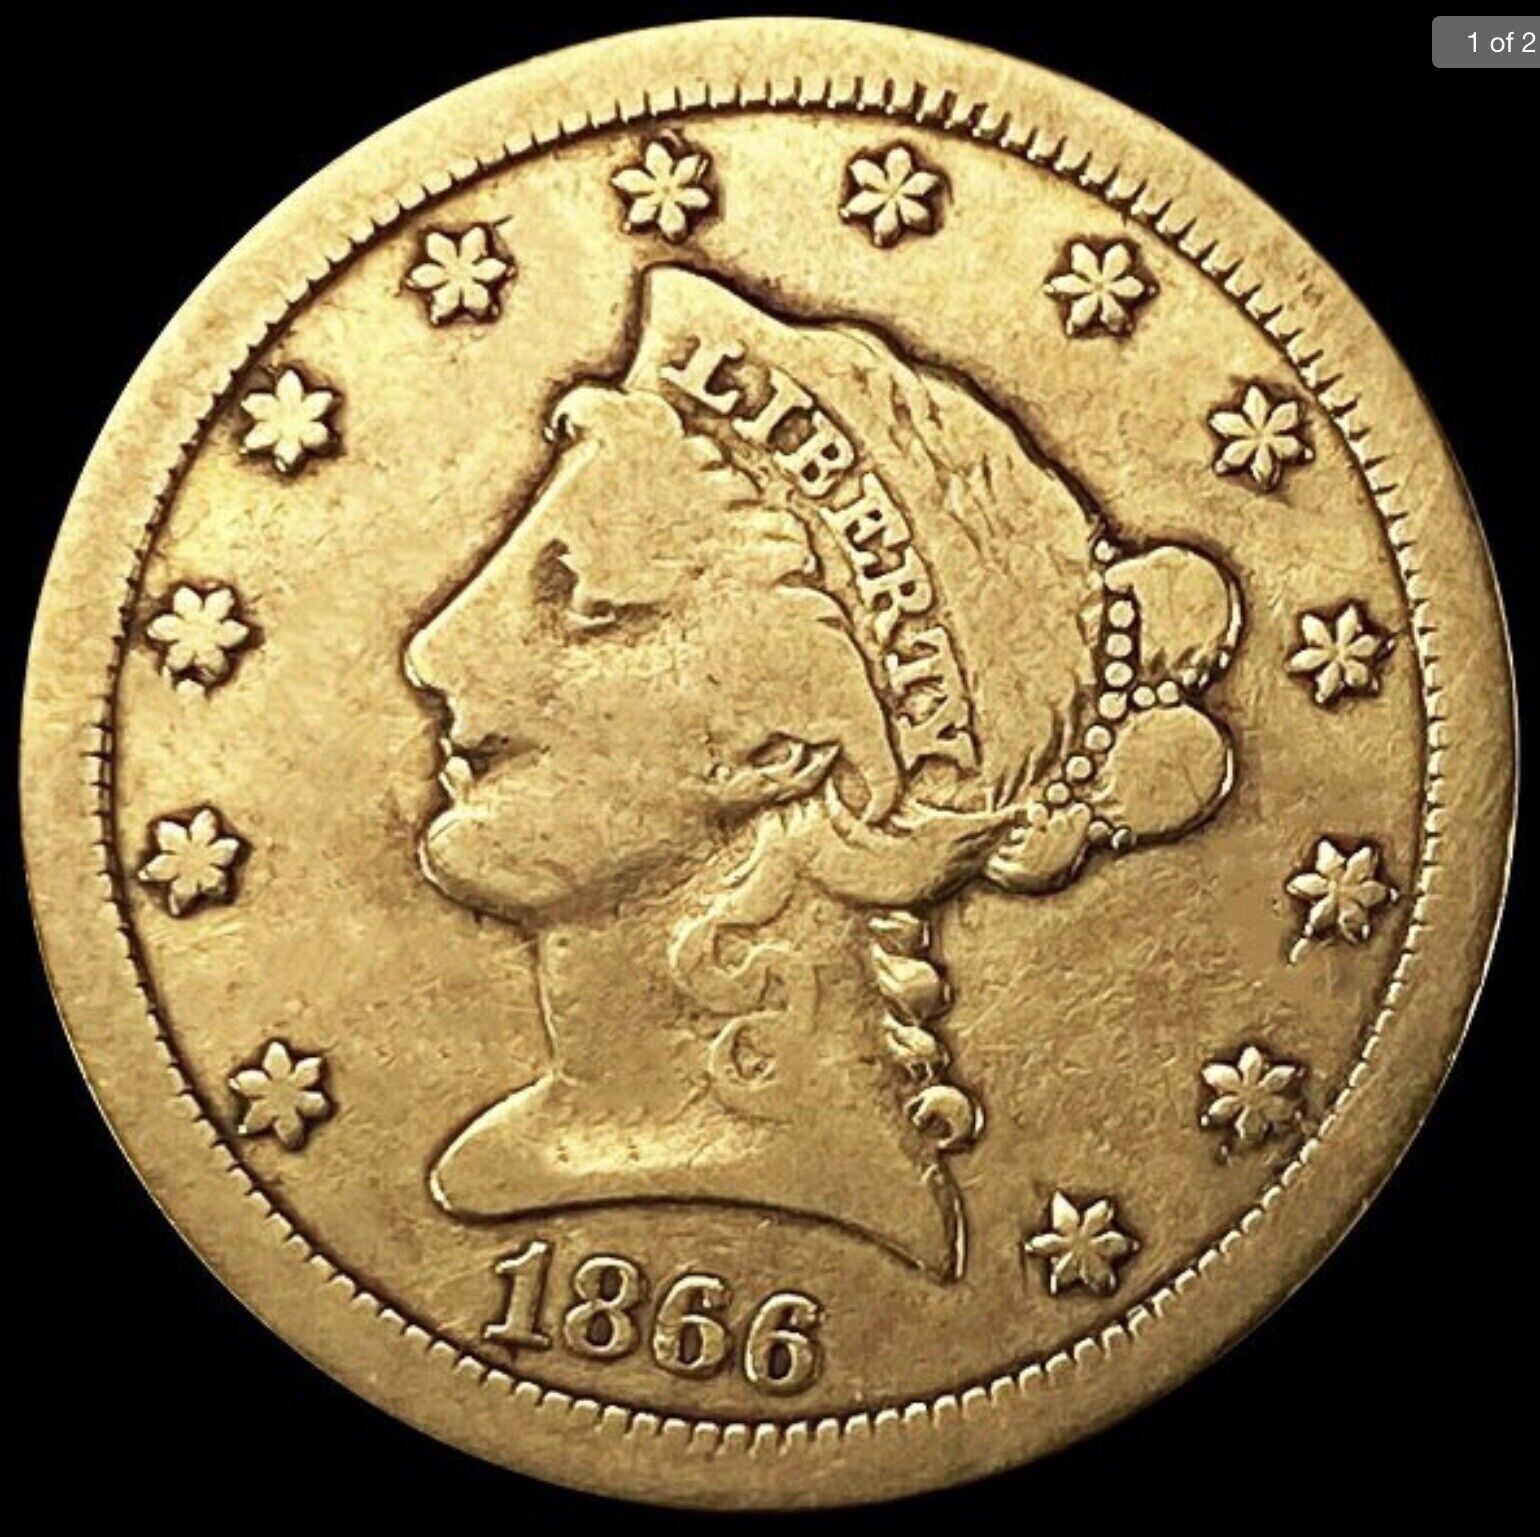 1866 S Coronet Head Gold $2.50 Quarter Eagle 🦅 VF Only 38,960 🇺🇸 Amazing 🇺🇸